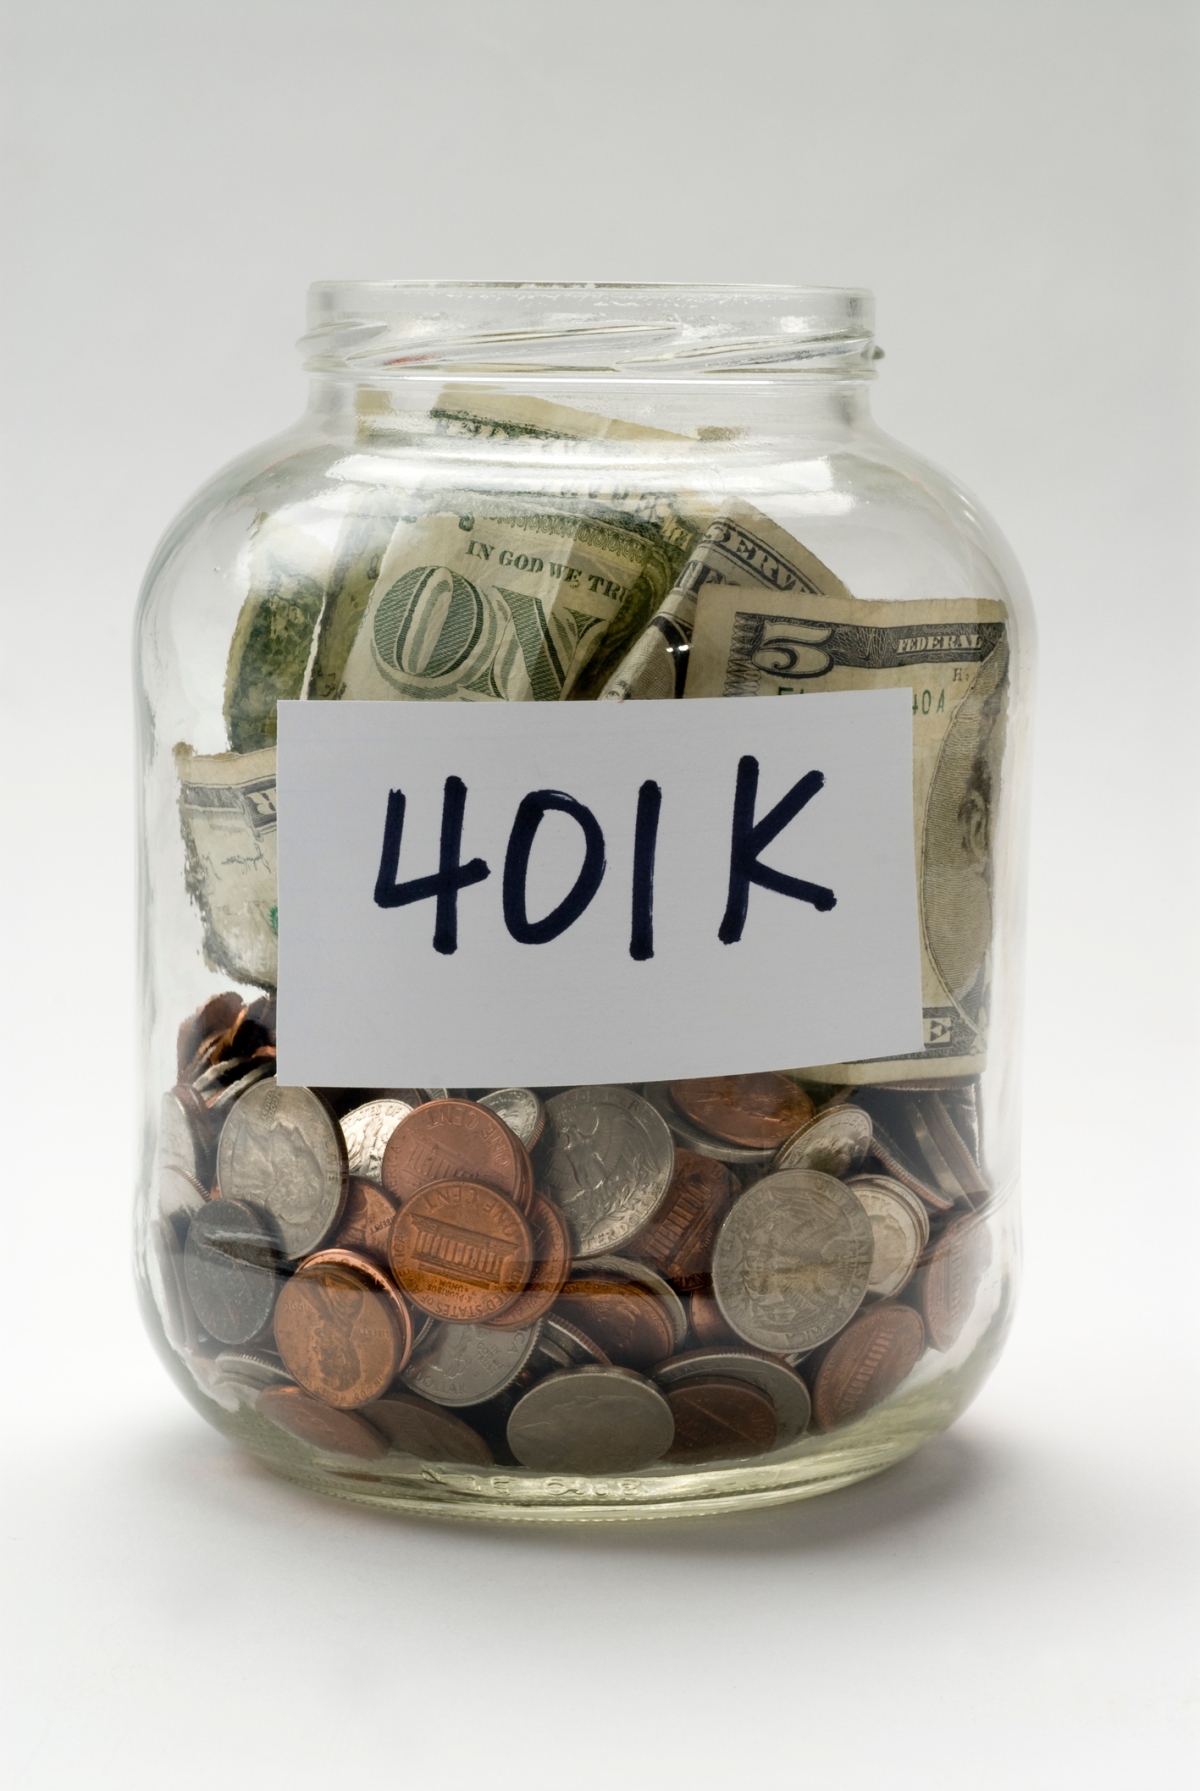 Top Three Reasons to Contribute to your 401(k)